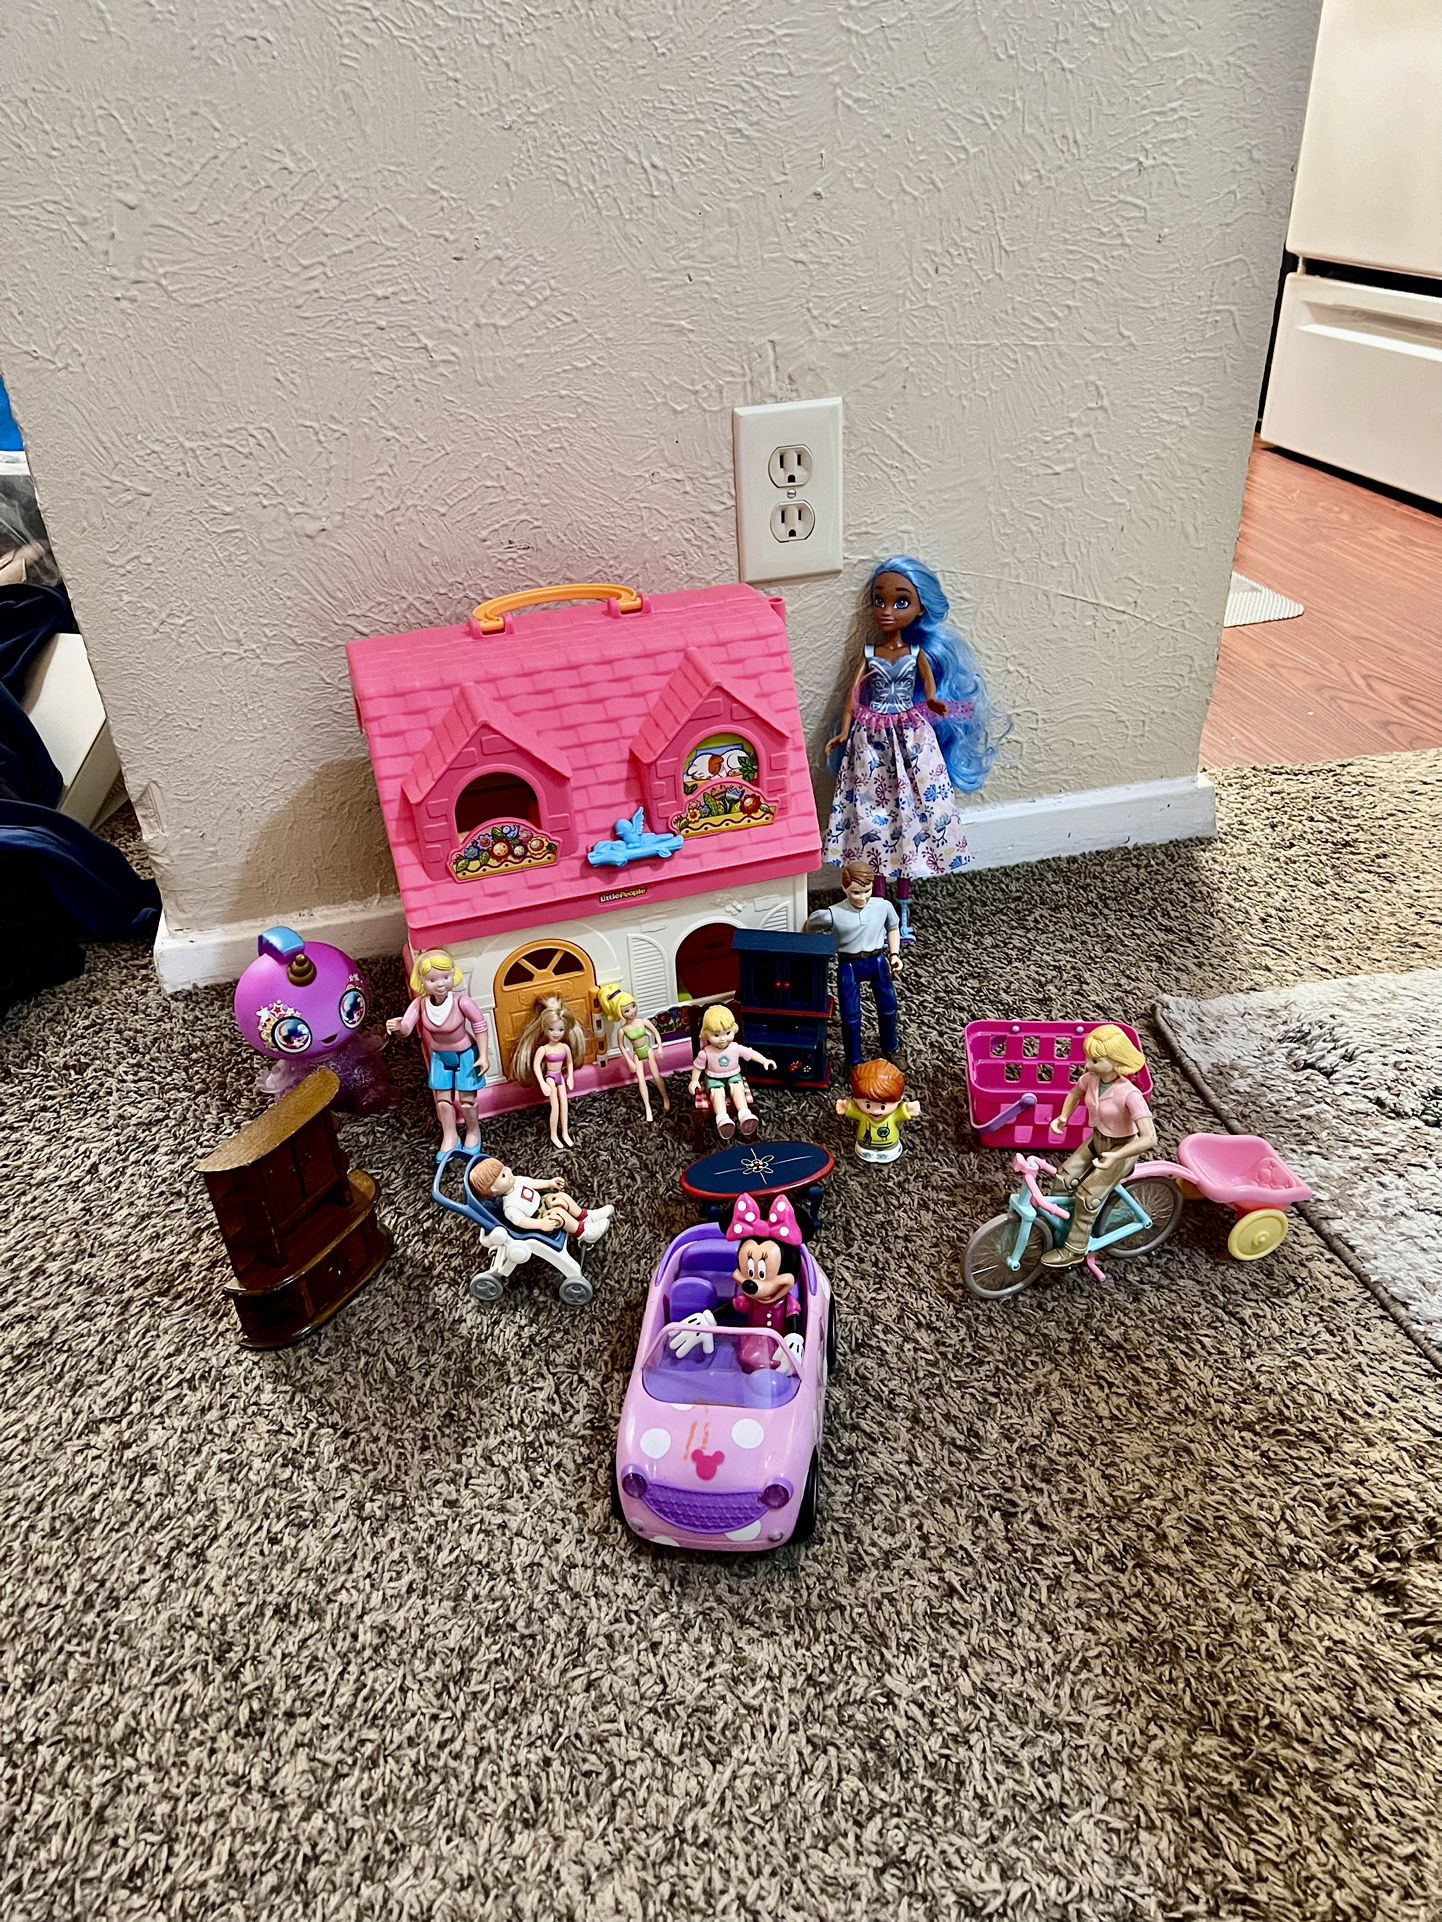 House And Dolls All For 25$ 